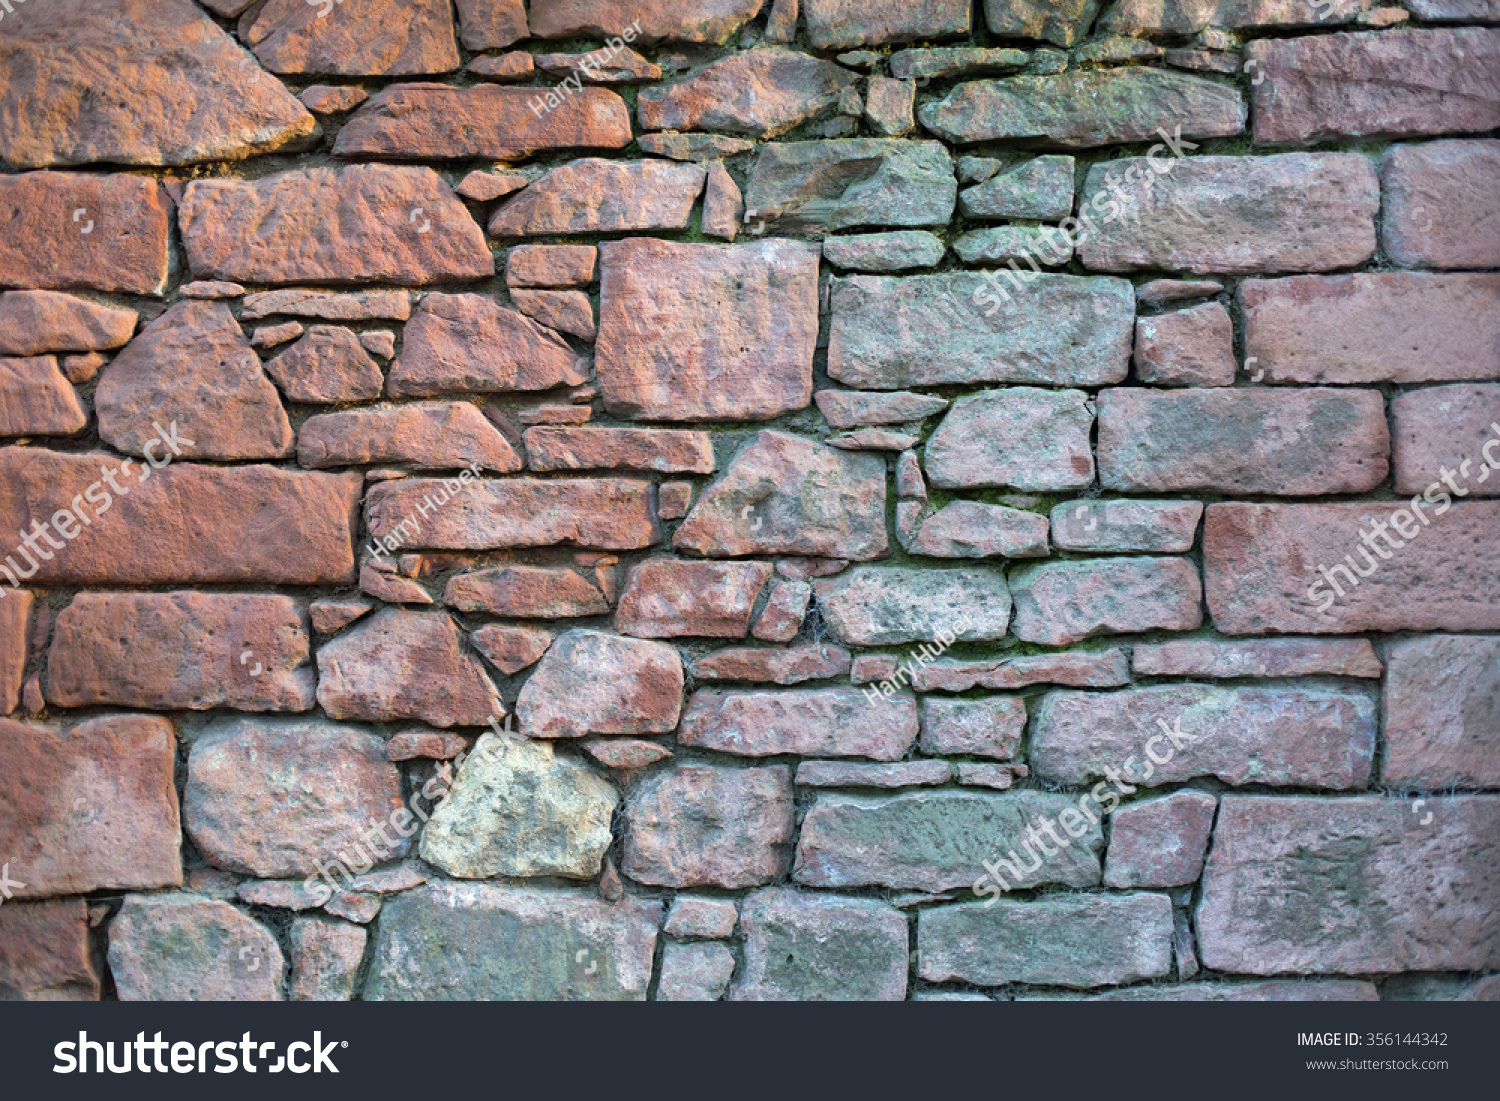 Old stone wall with different size of rock  #356144342